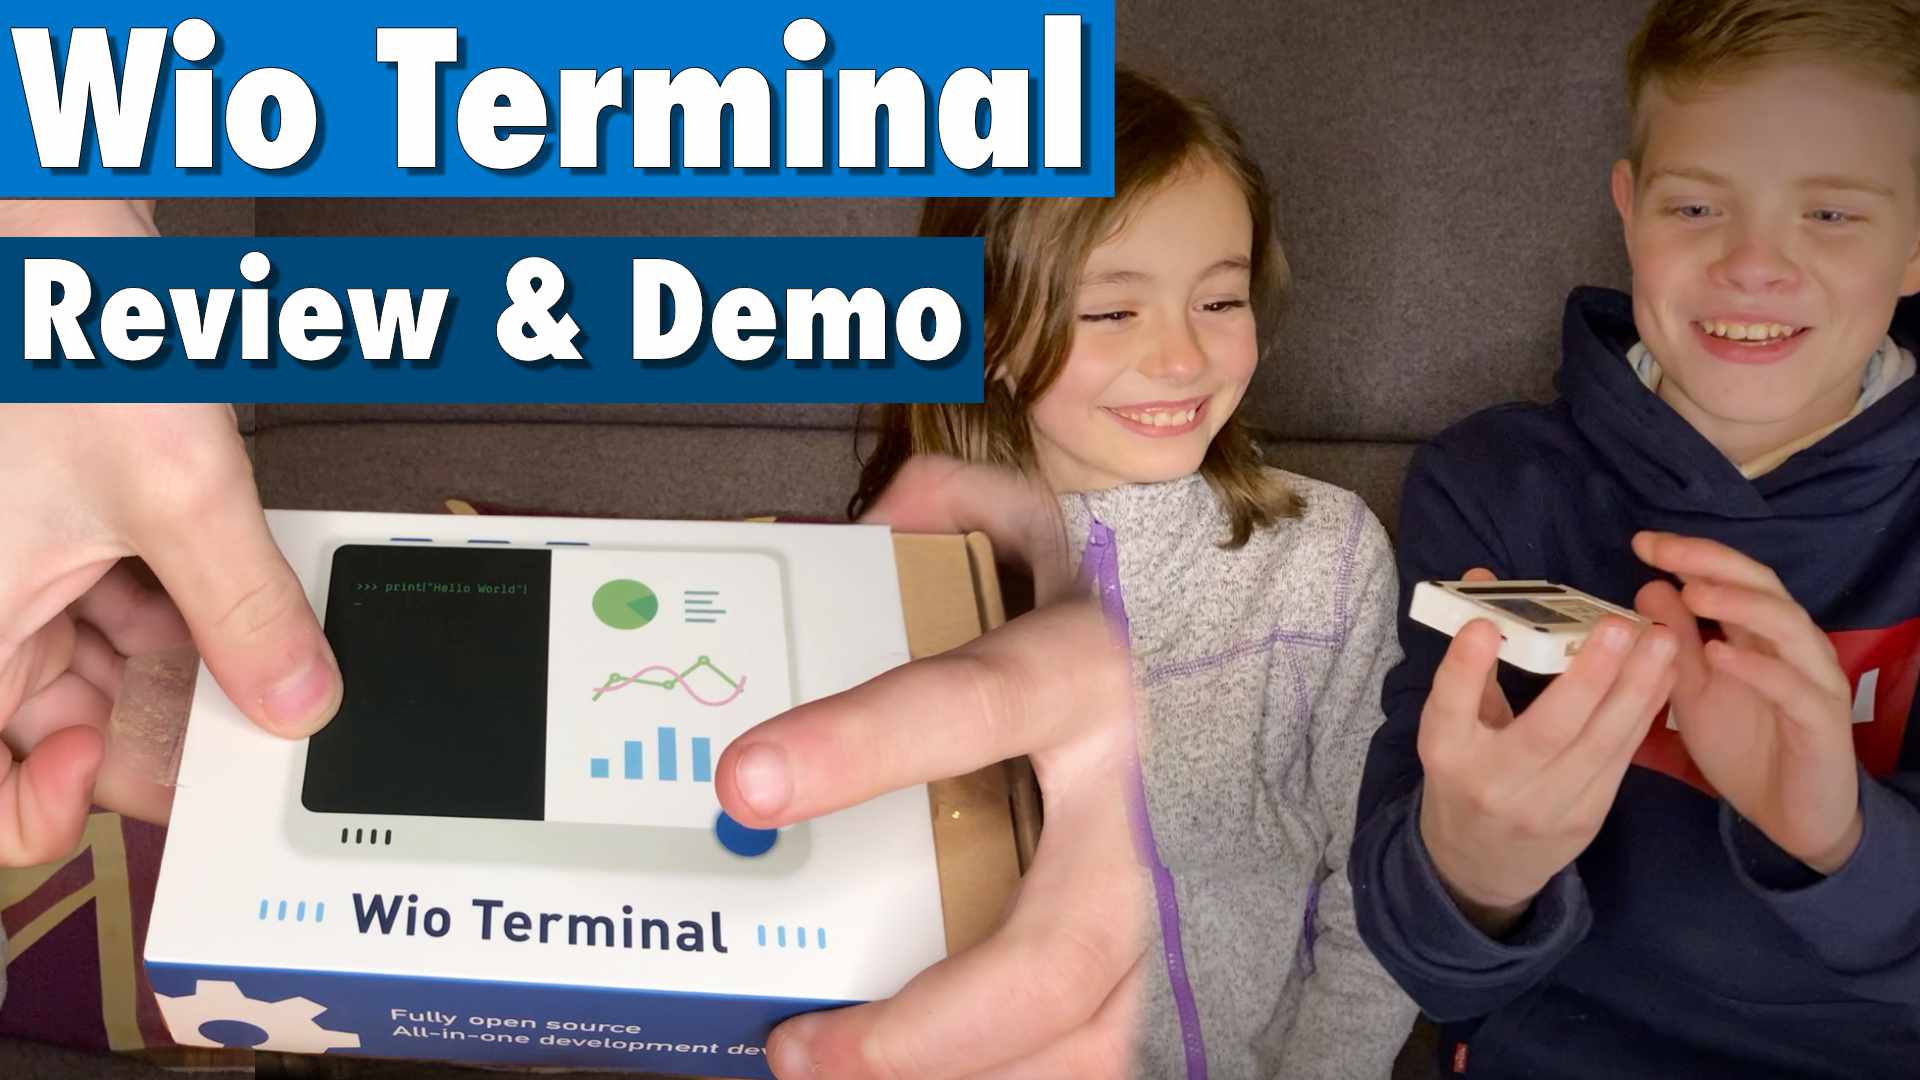 Boy and girl holding wio terminal with an image of the wio terminals box next to them